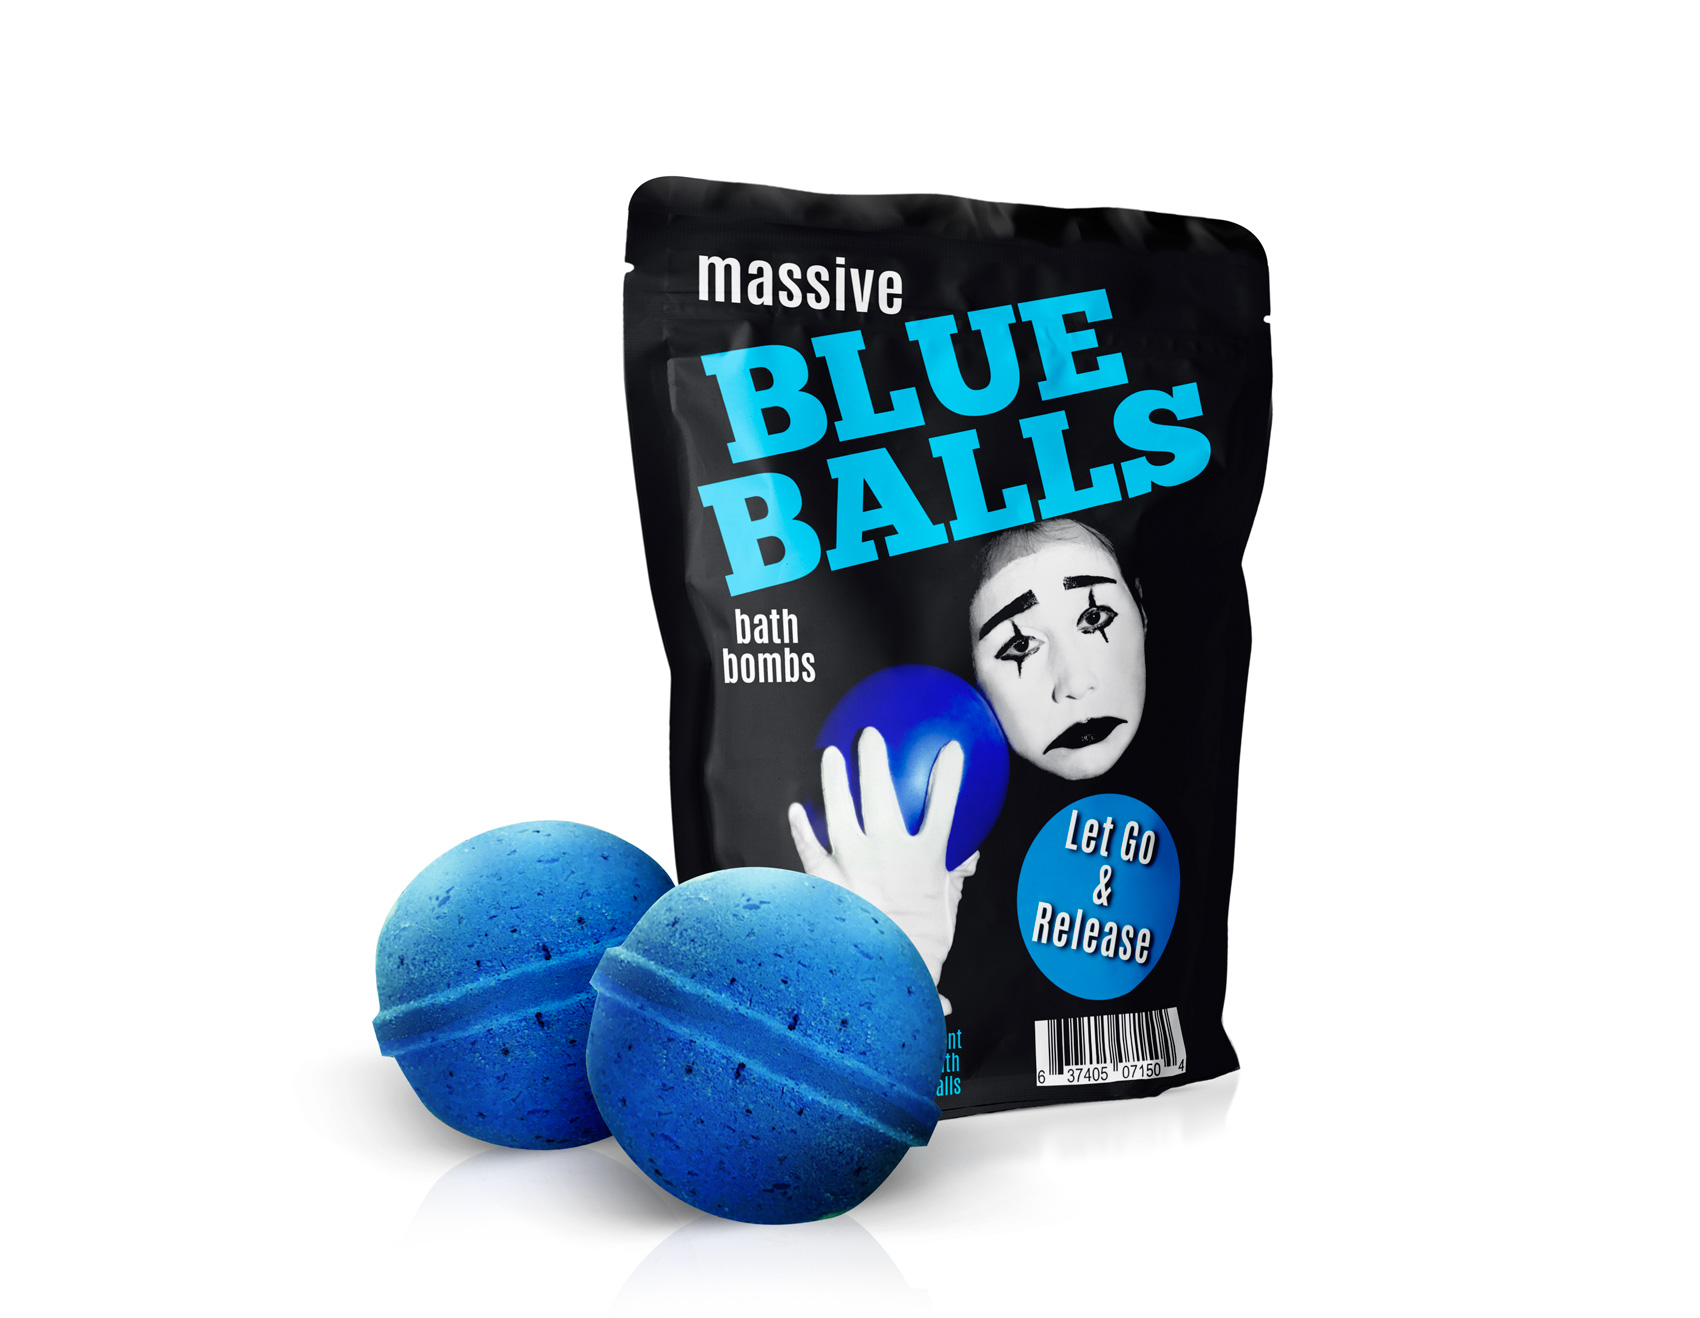 Are Blue Balls Real?